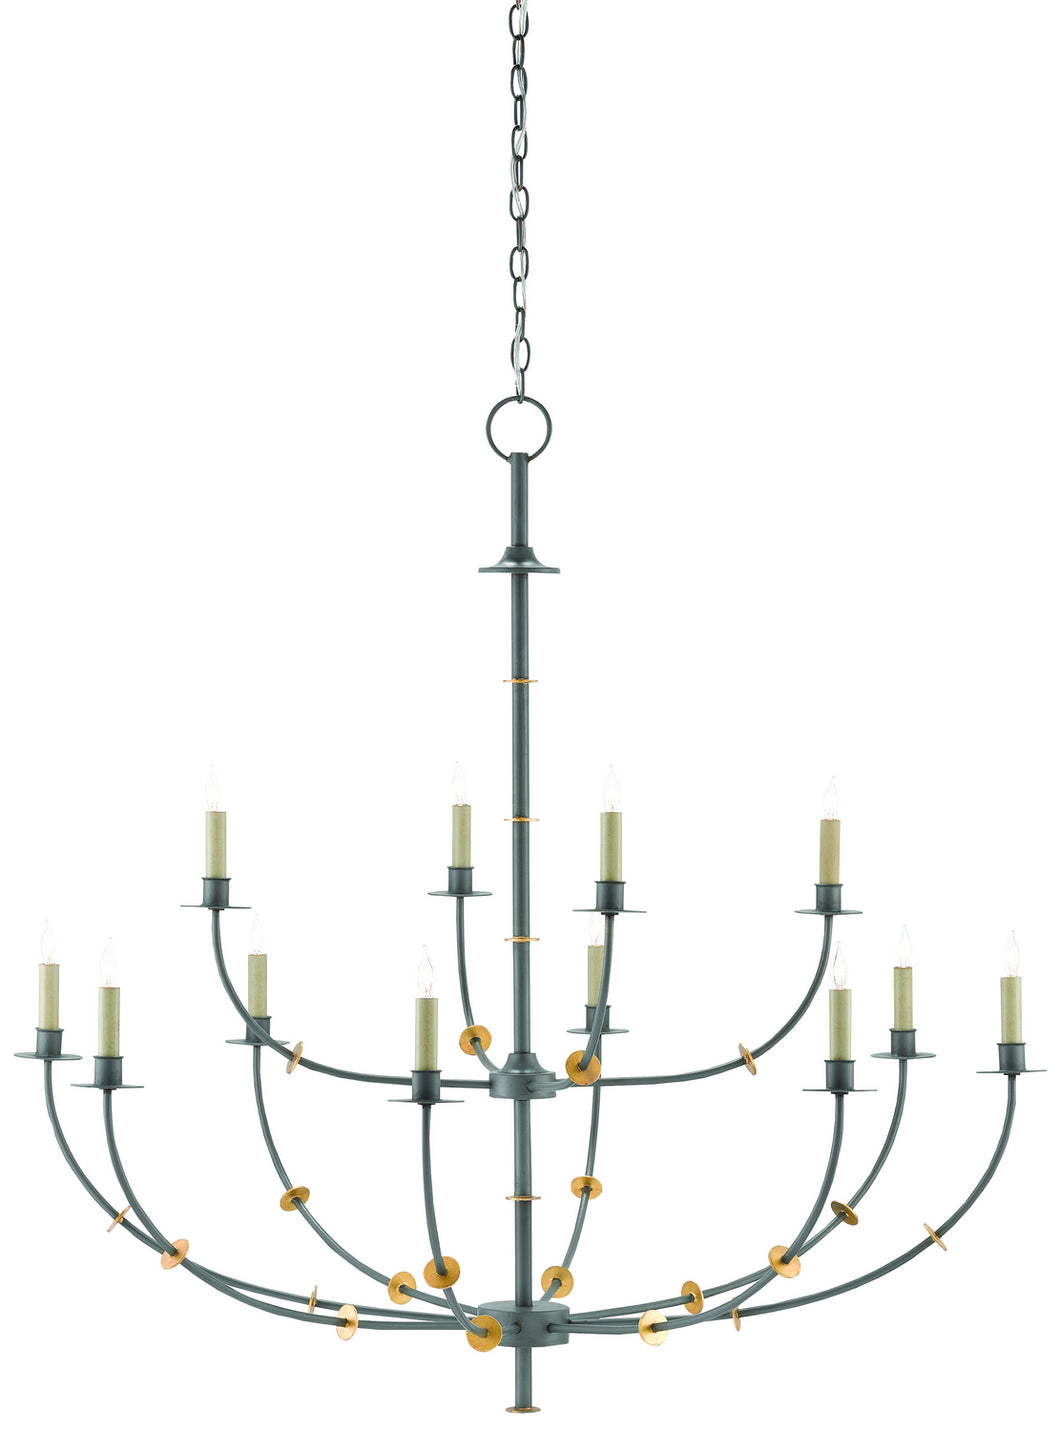 Currey and Company - 9000-0331 - 12 Light Chandelier - Balladier